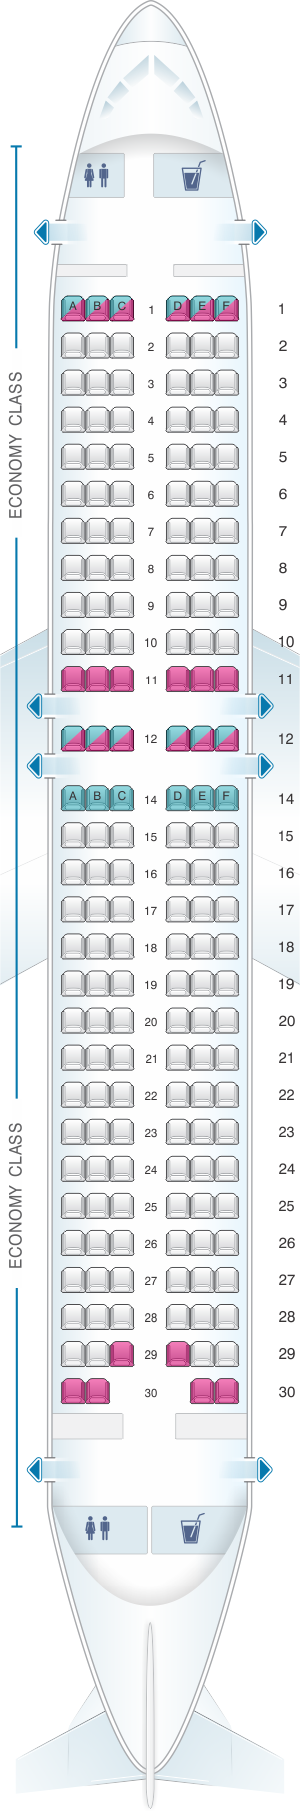 Seat Map ANA - All Nippon Airways Airbus A320 domestic | SeatMaestro